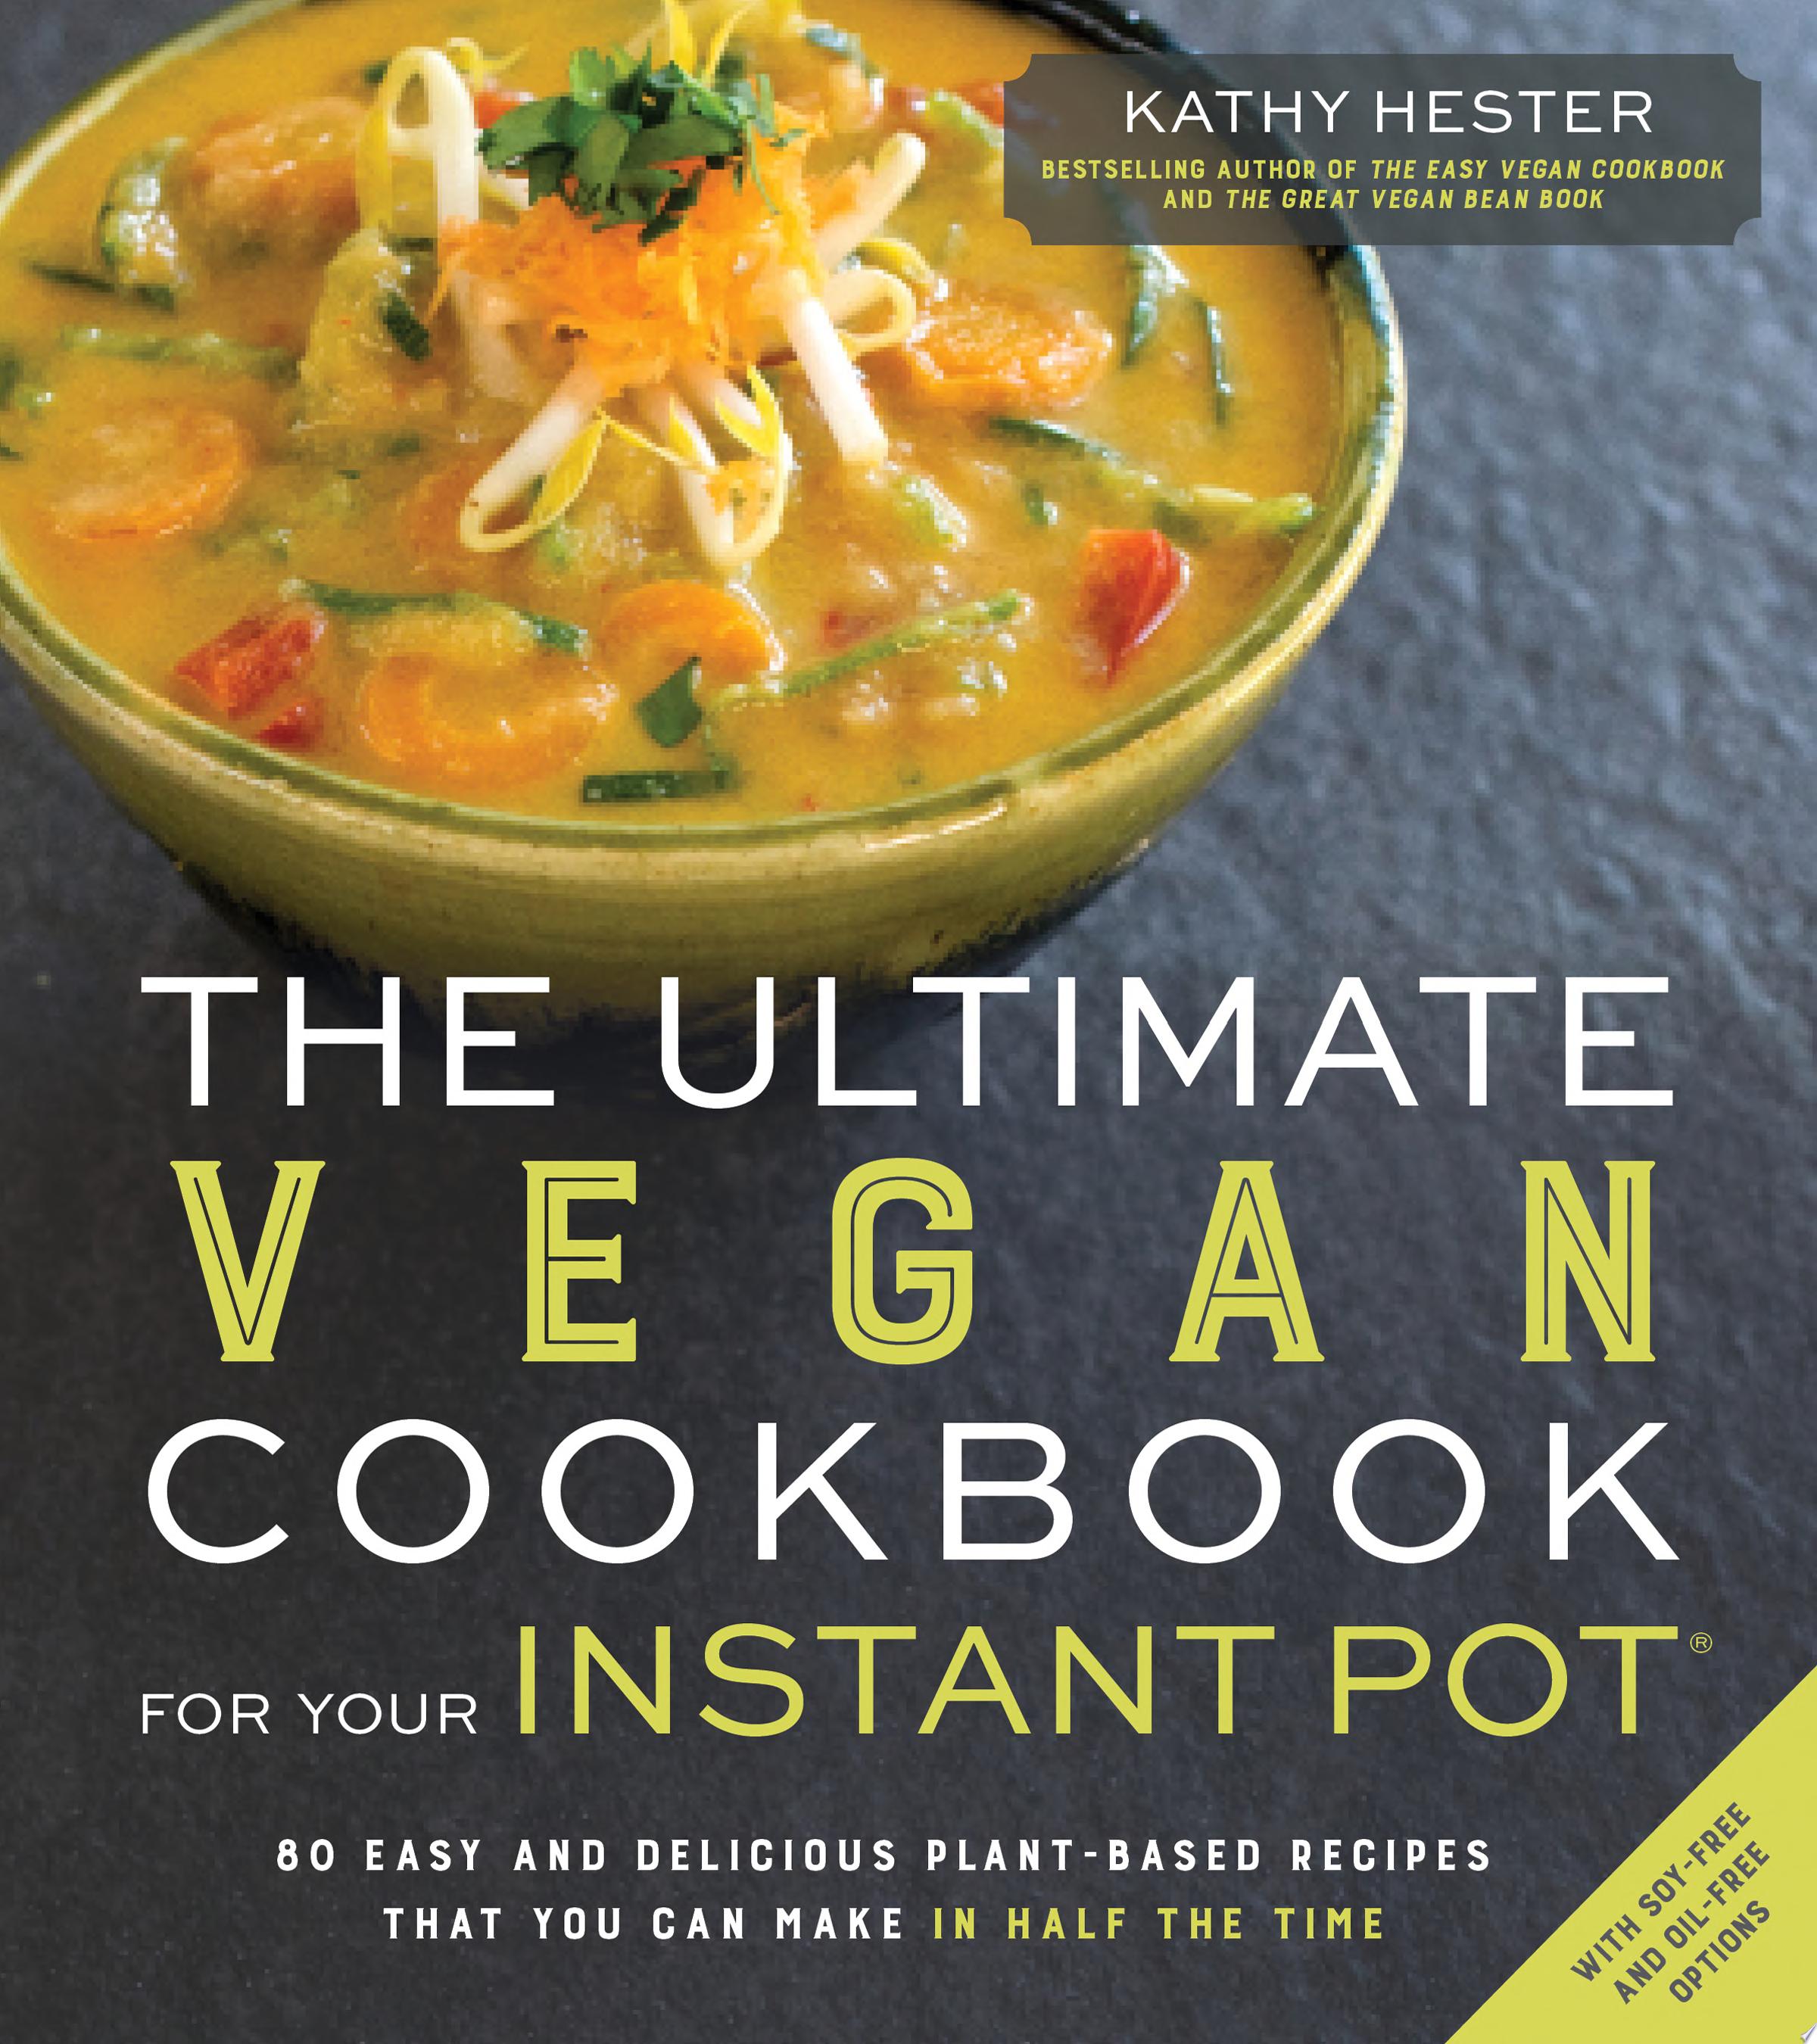 Image for "The Ultimate Vegan Cookbook for Your Instant Pot"